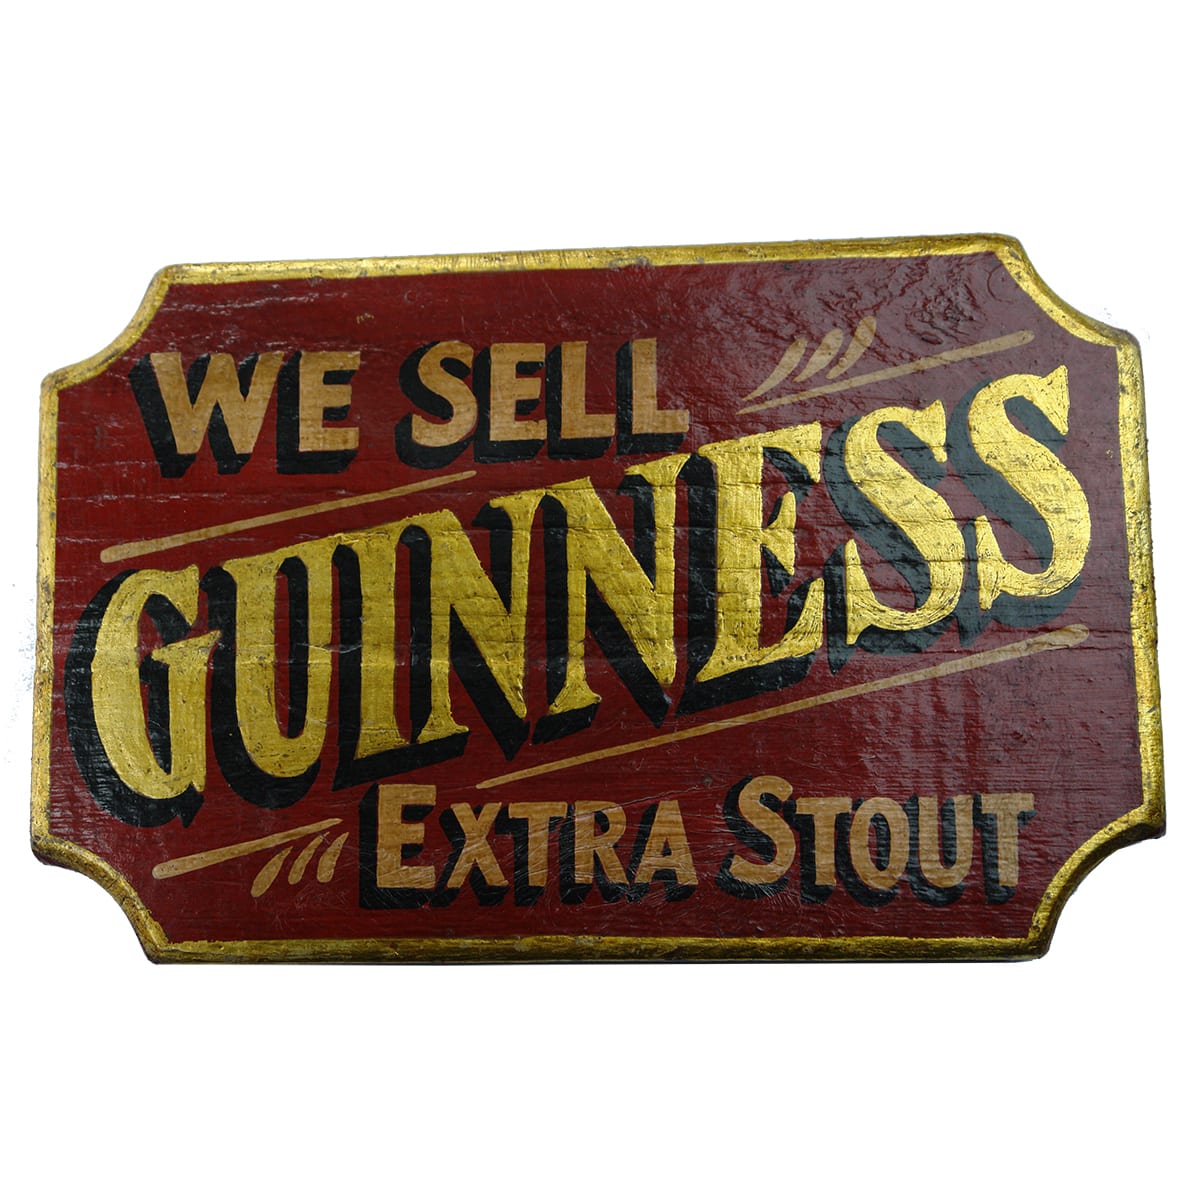 Wooden Advertising Board. Guinness Extra Stout.